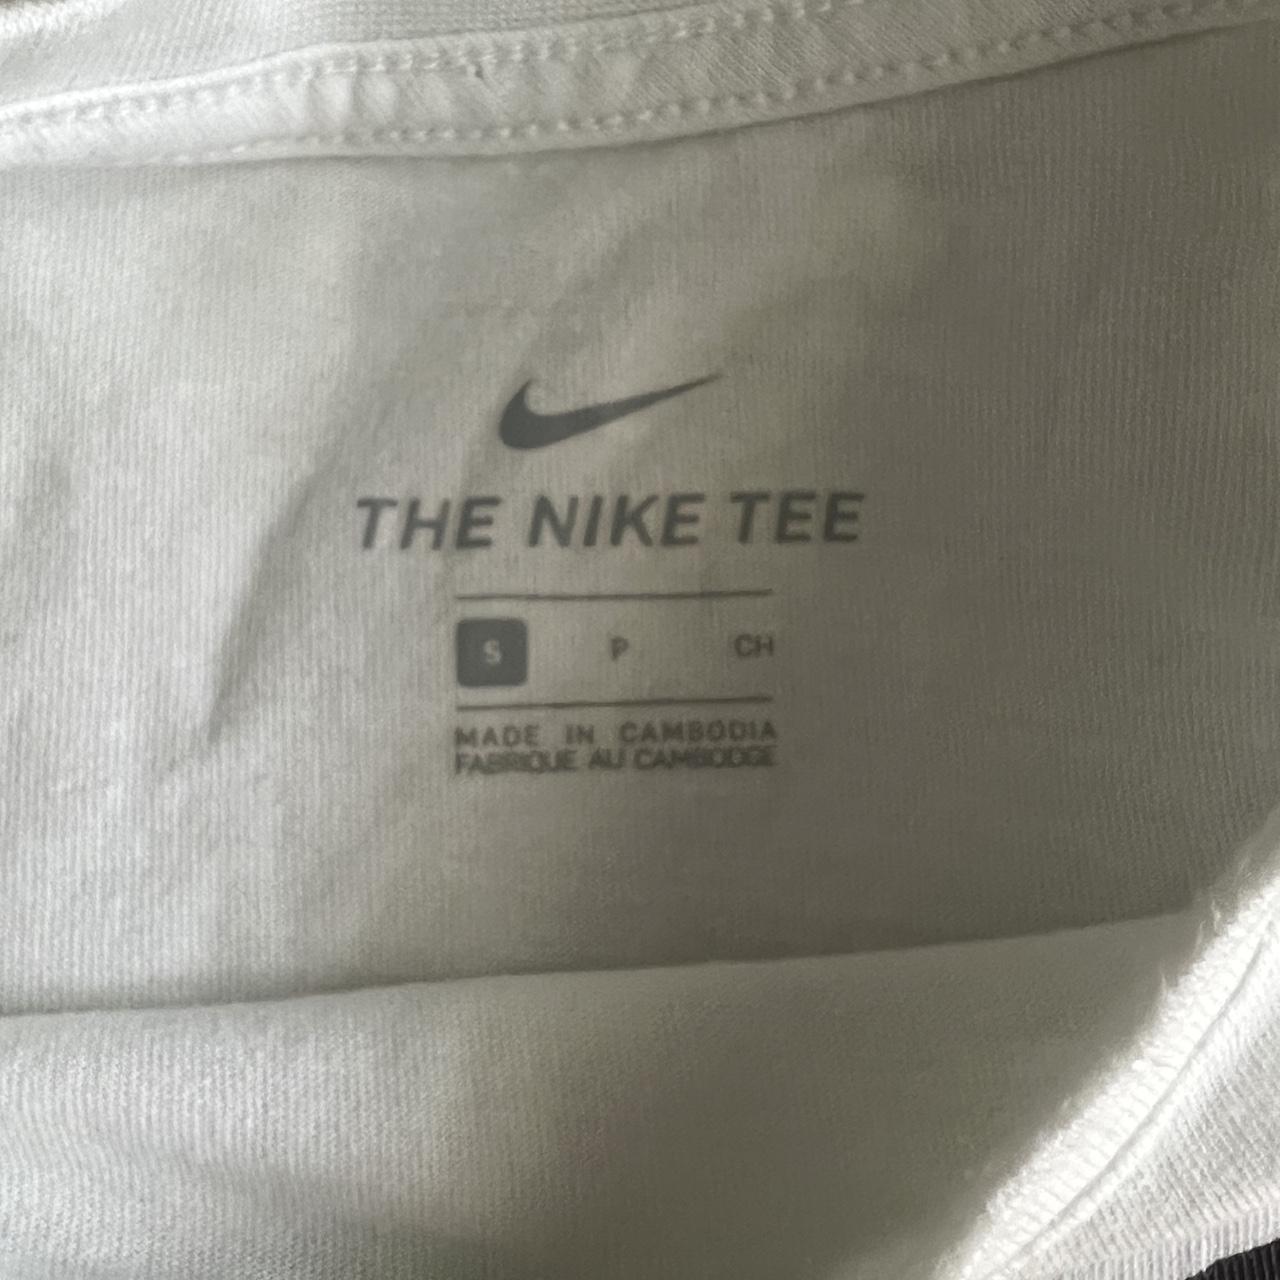 Nine tee in perfect condition. No stains!!! #nike... - Depop